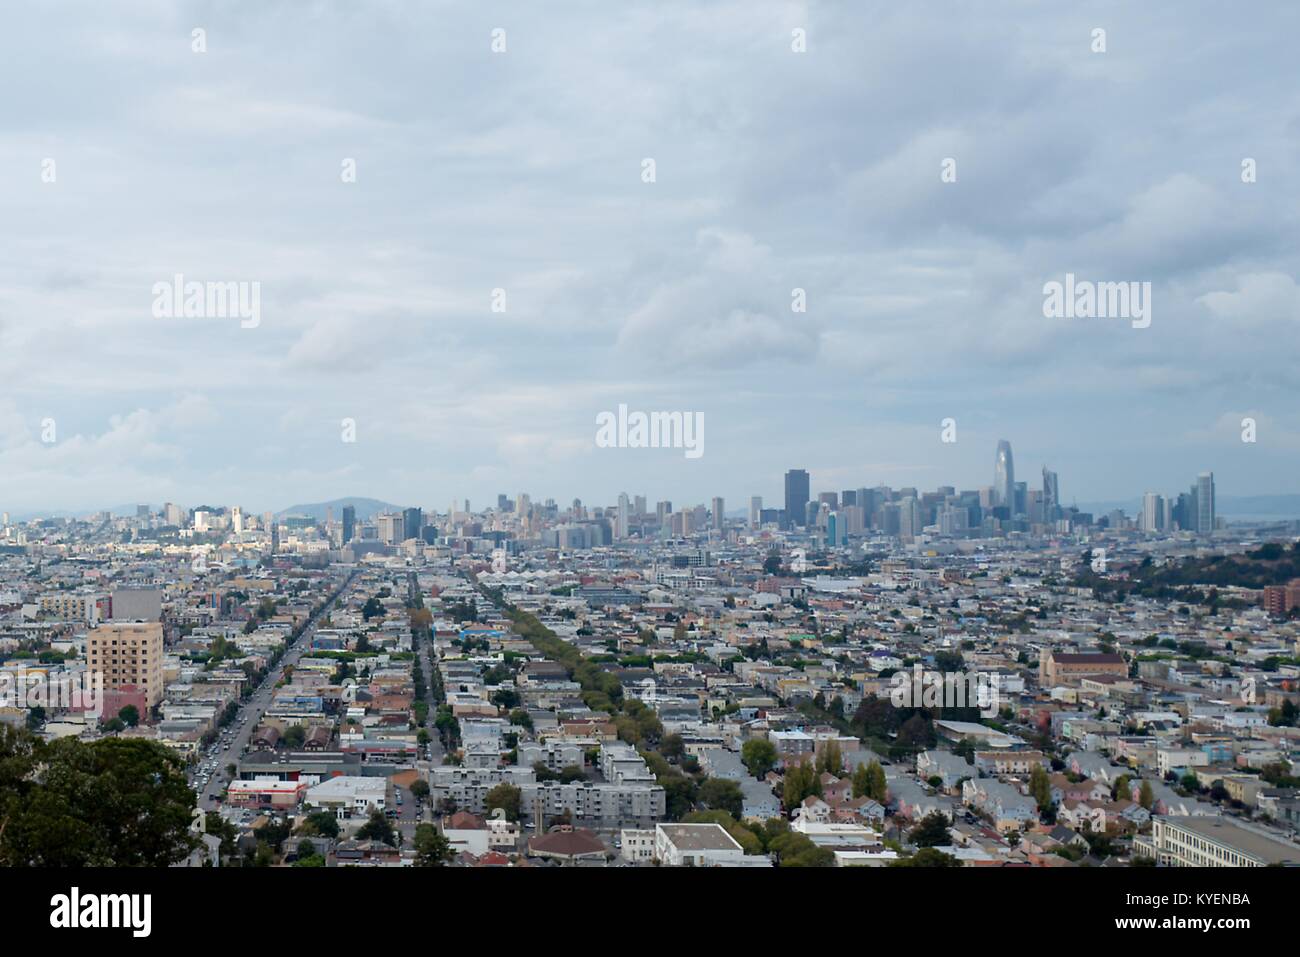 Aerial view of the urban skyline of San Francisco, California, as well as the Mission District, Potrero Hill, South of Market, and Dolores Heights neighborhoods under a dramatic sky, November 3, 2017. () Stock Photo